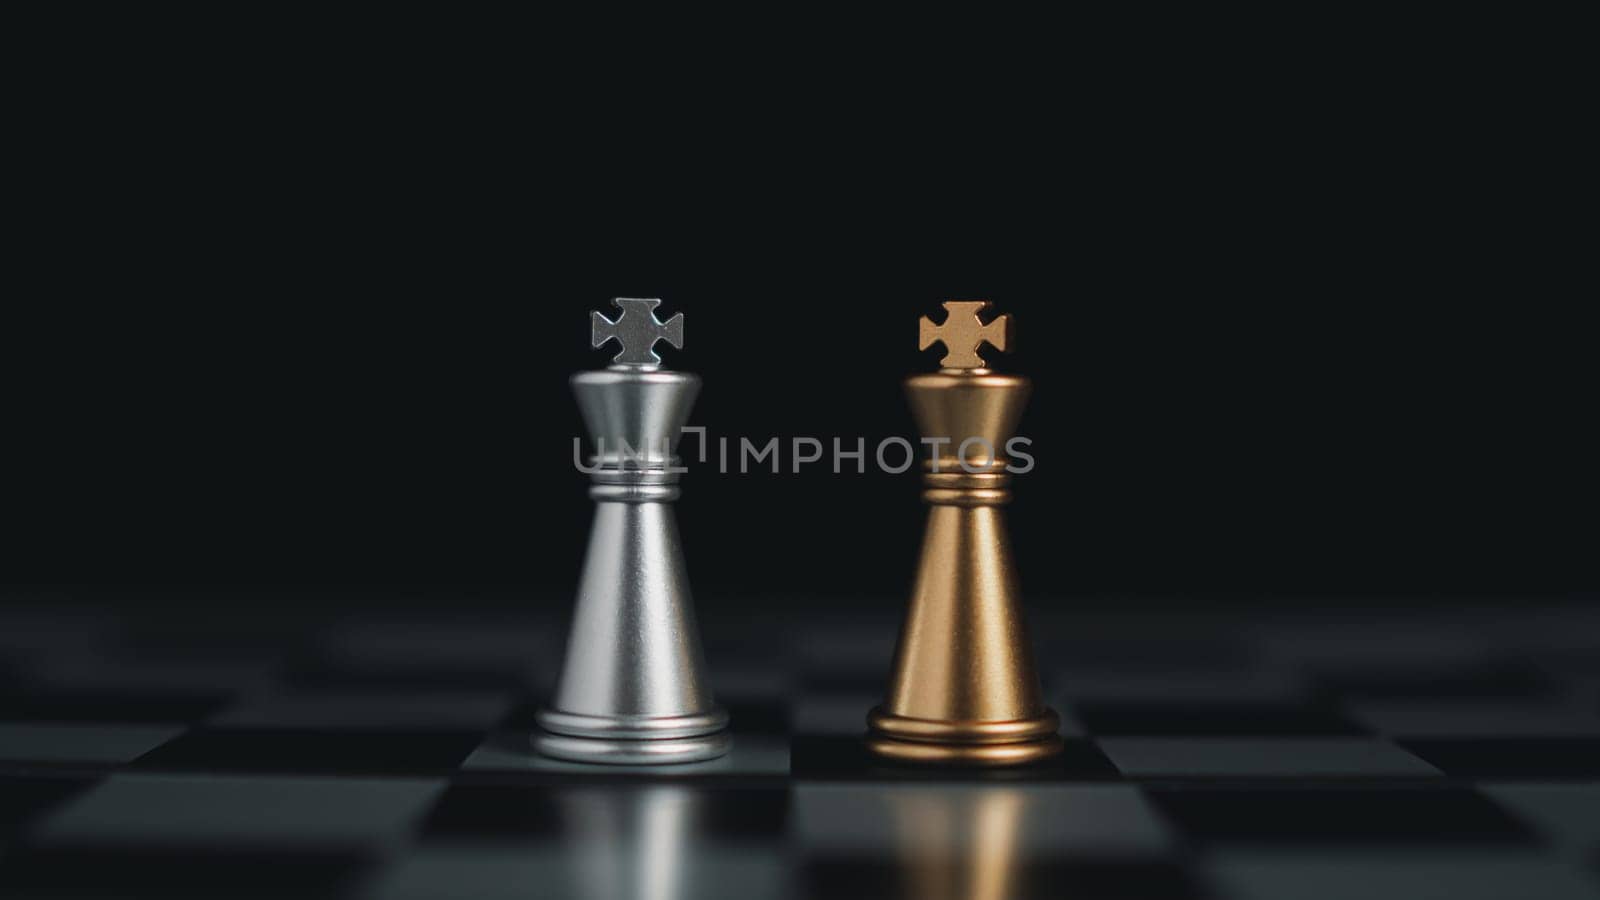 Gold and silver chess pieces in chess board game for business comparison. Leadership concepts, human resource management concepts. by Unimages2527